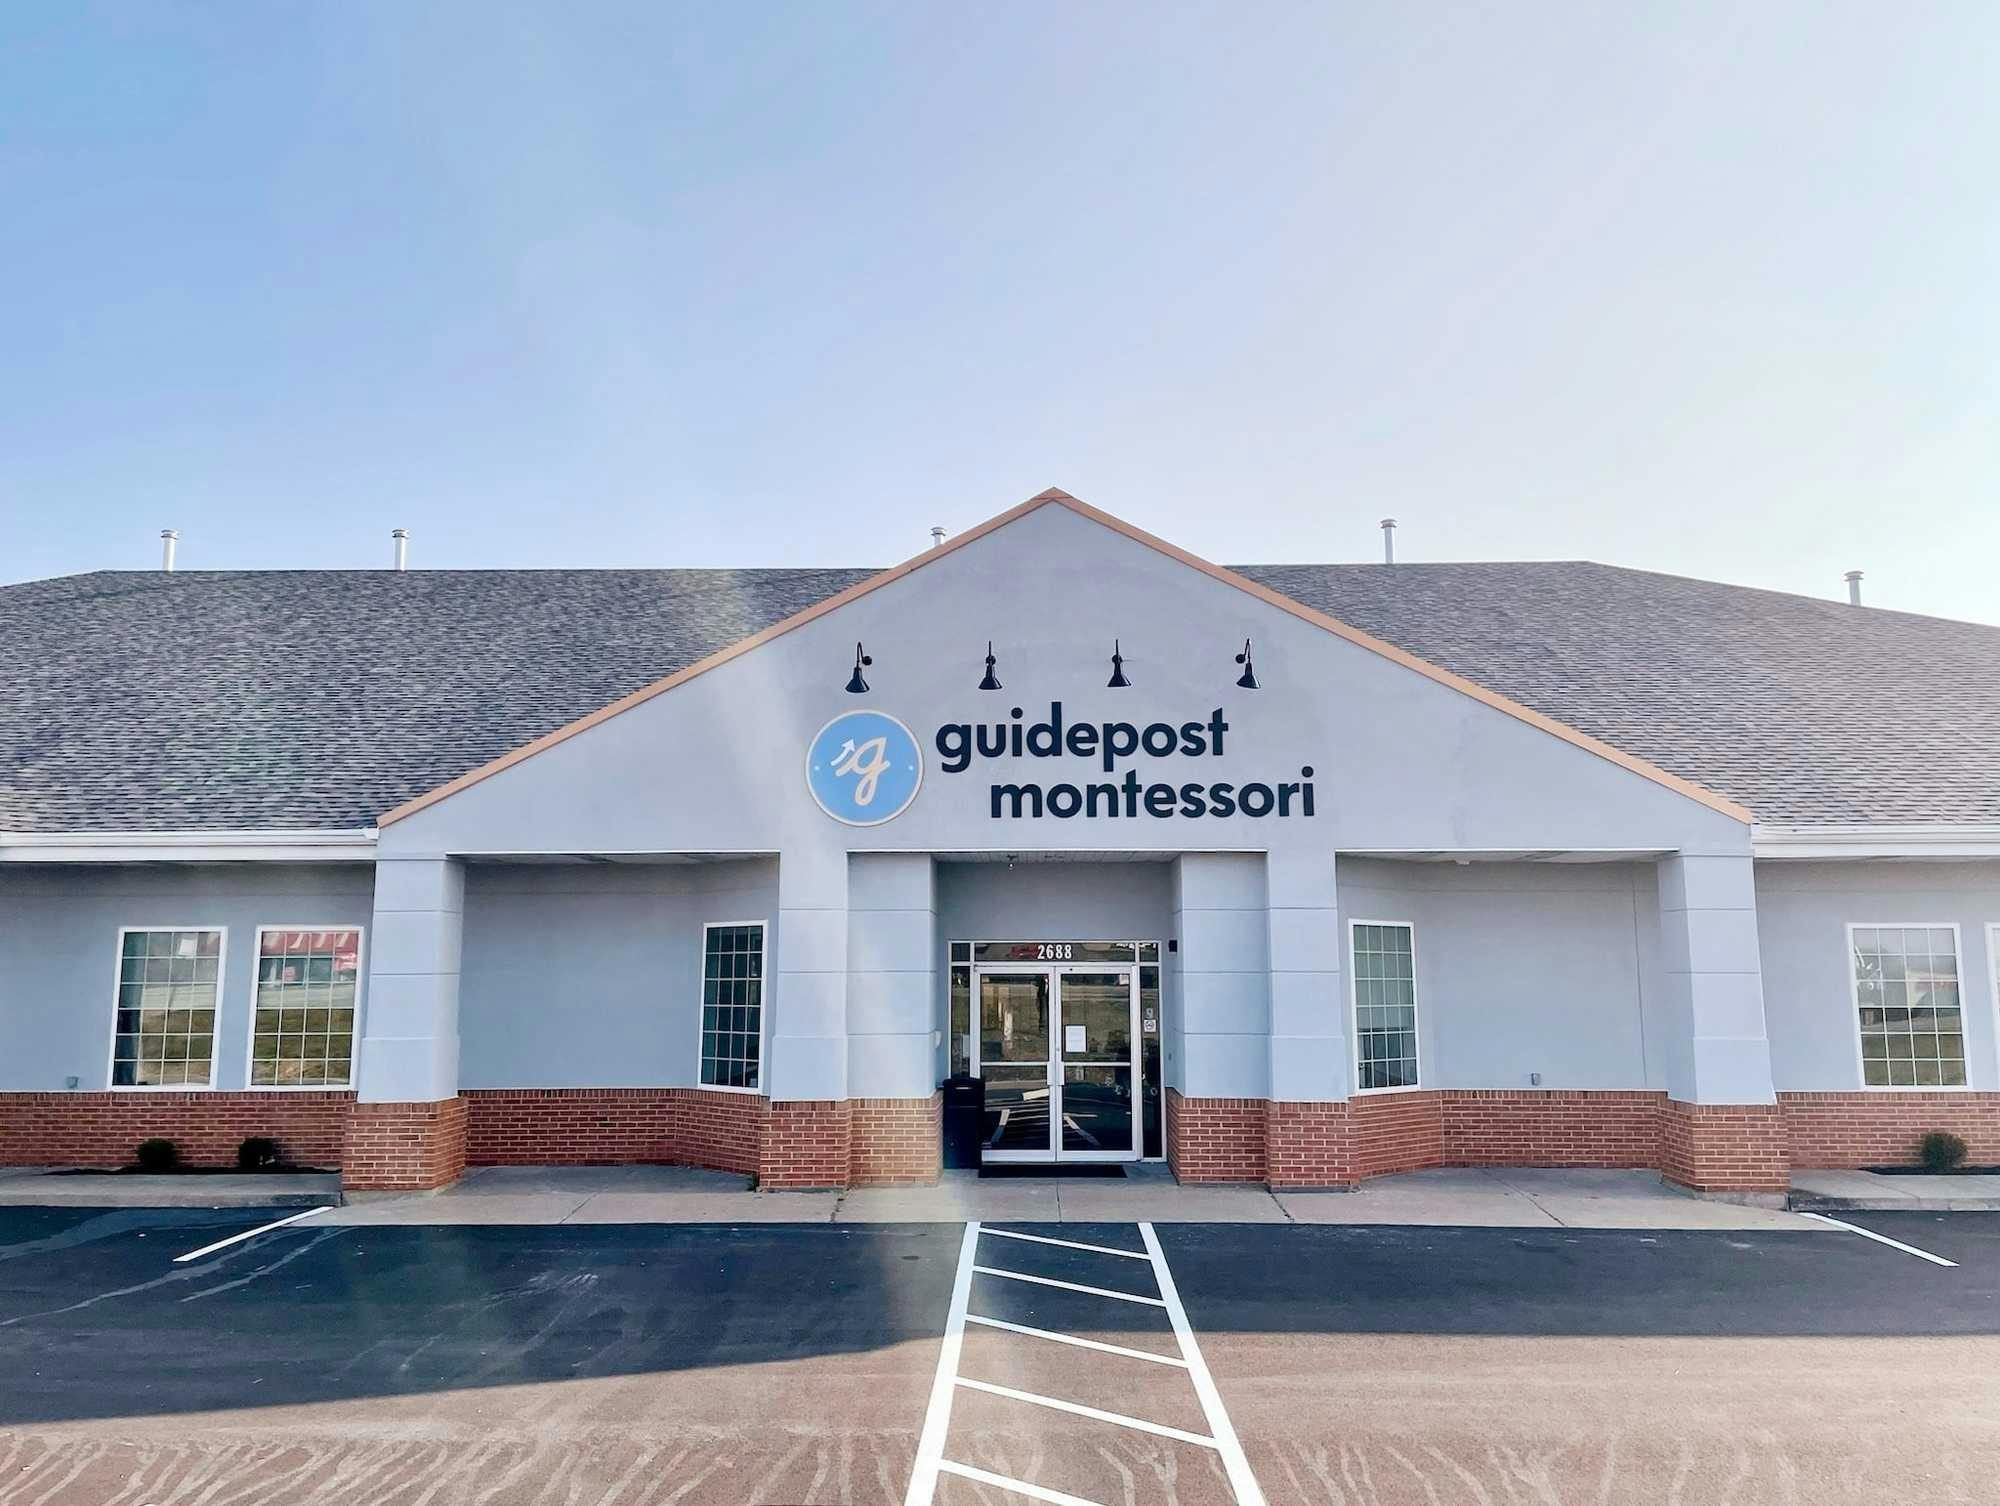 View of Guidepost Montessori at O'Fallon from the parking lot that shows the front exterior of the building with a 4 pillared entrance under a branded Guidepost Montessori Sign